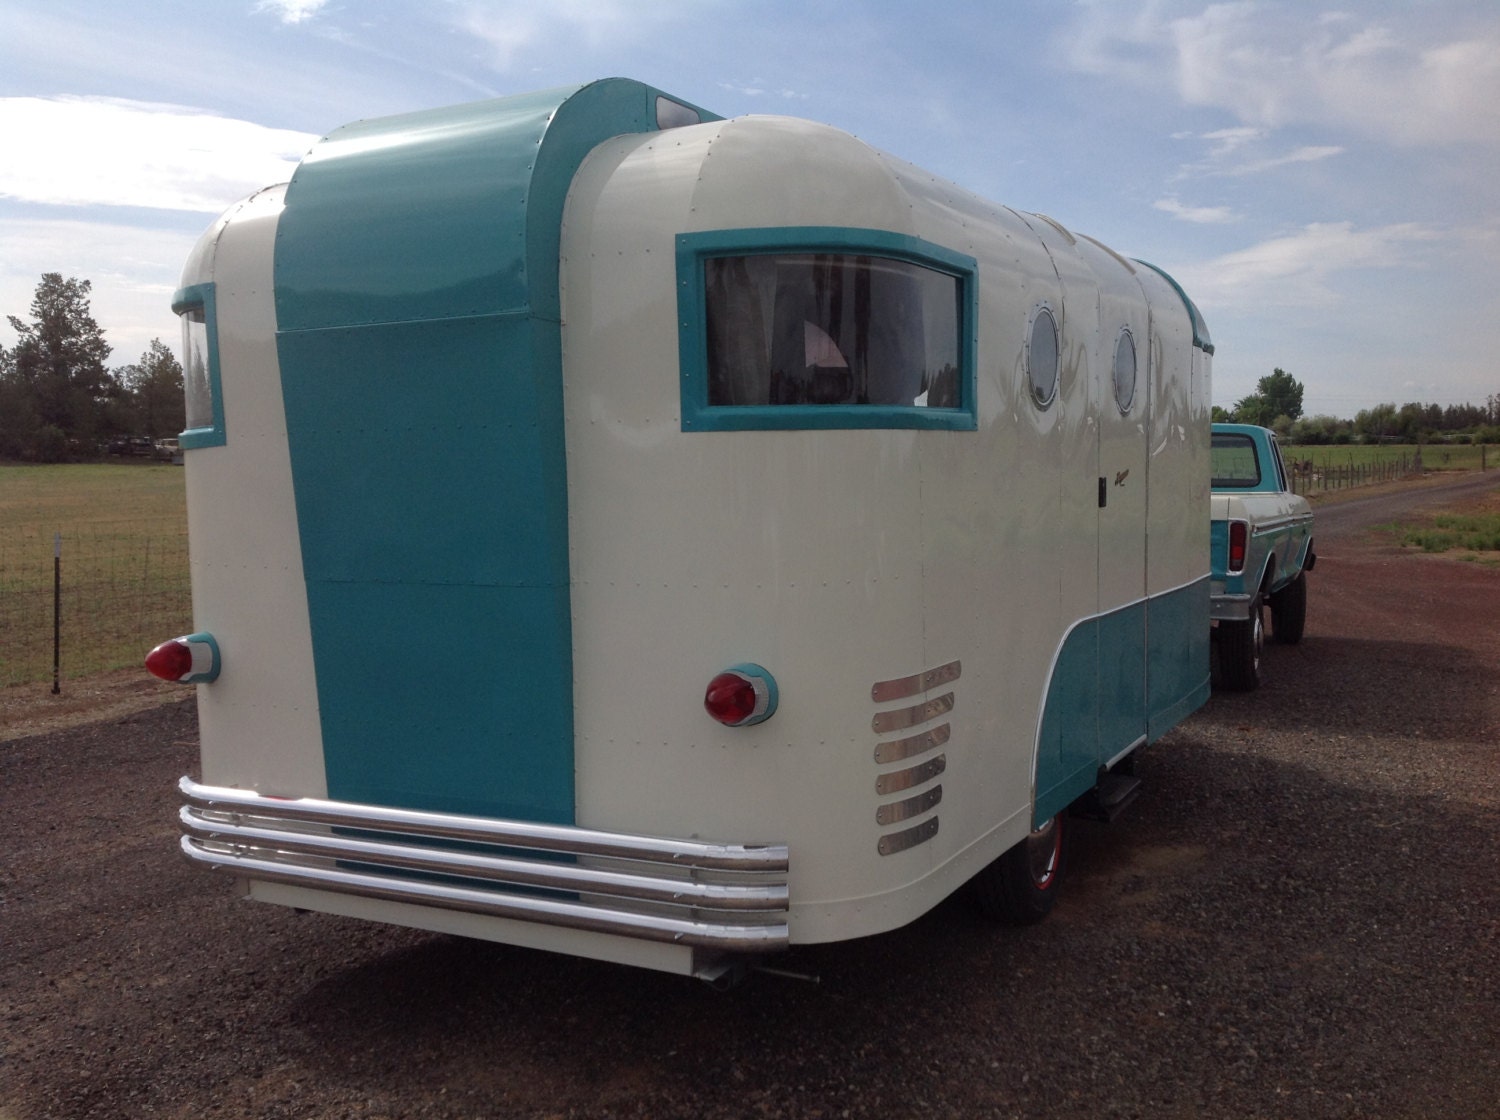 Pin by L H on Small space living | Vintage campers trailers, Vintage ...